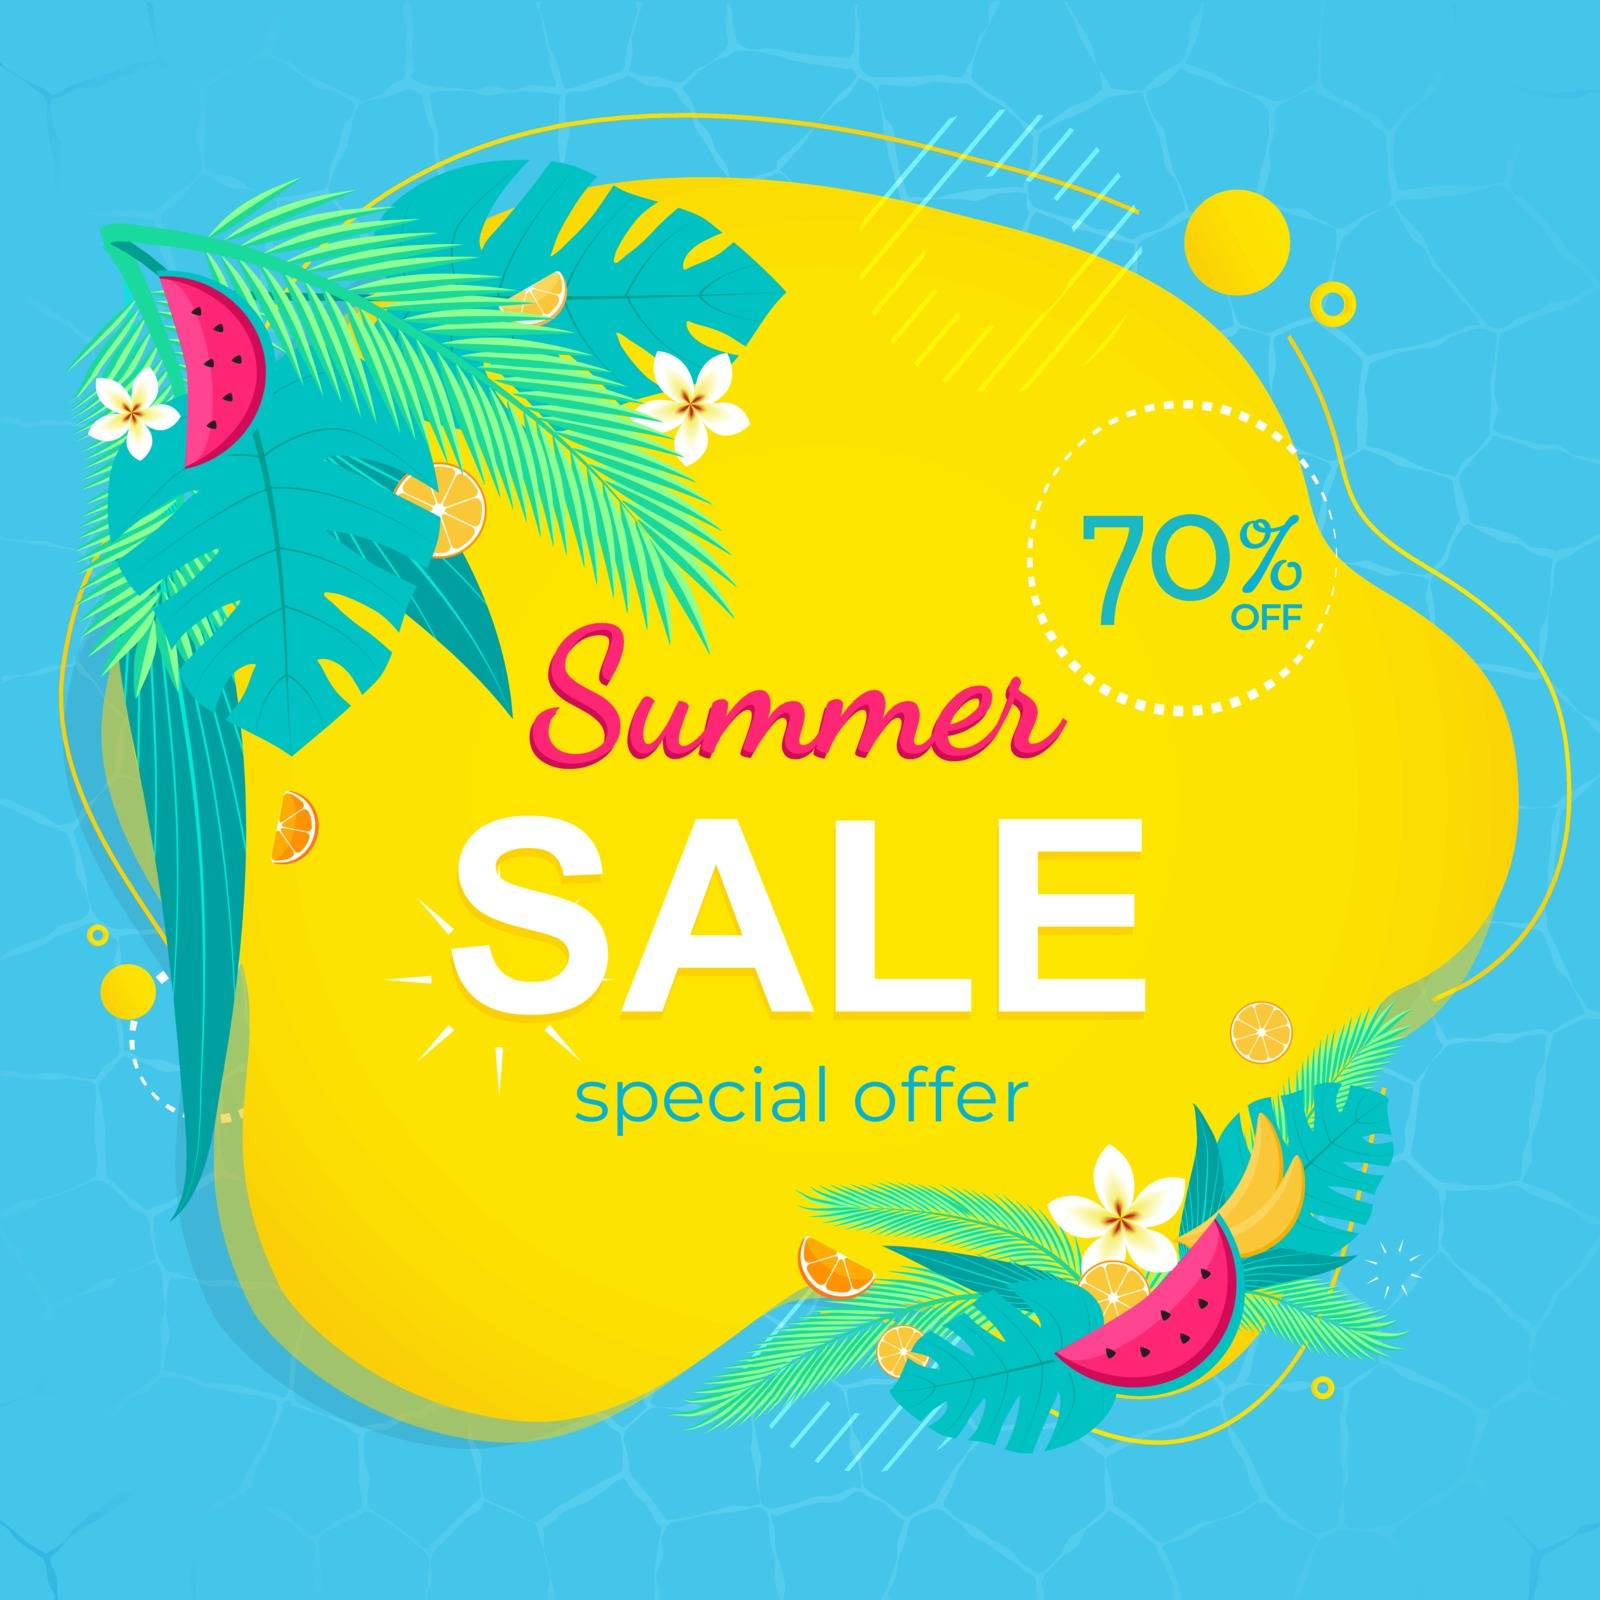 Sale promotional material vector illustration. Summer abstract background. by Sofir